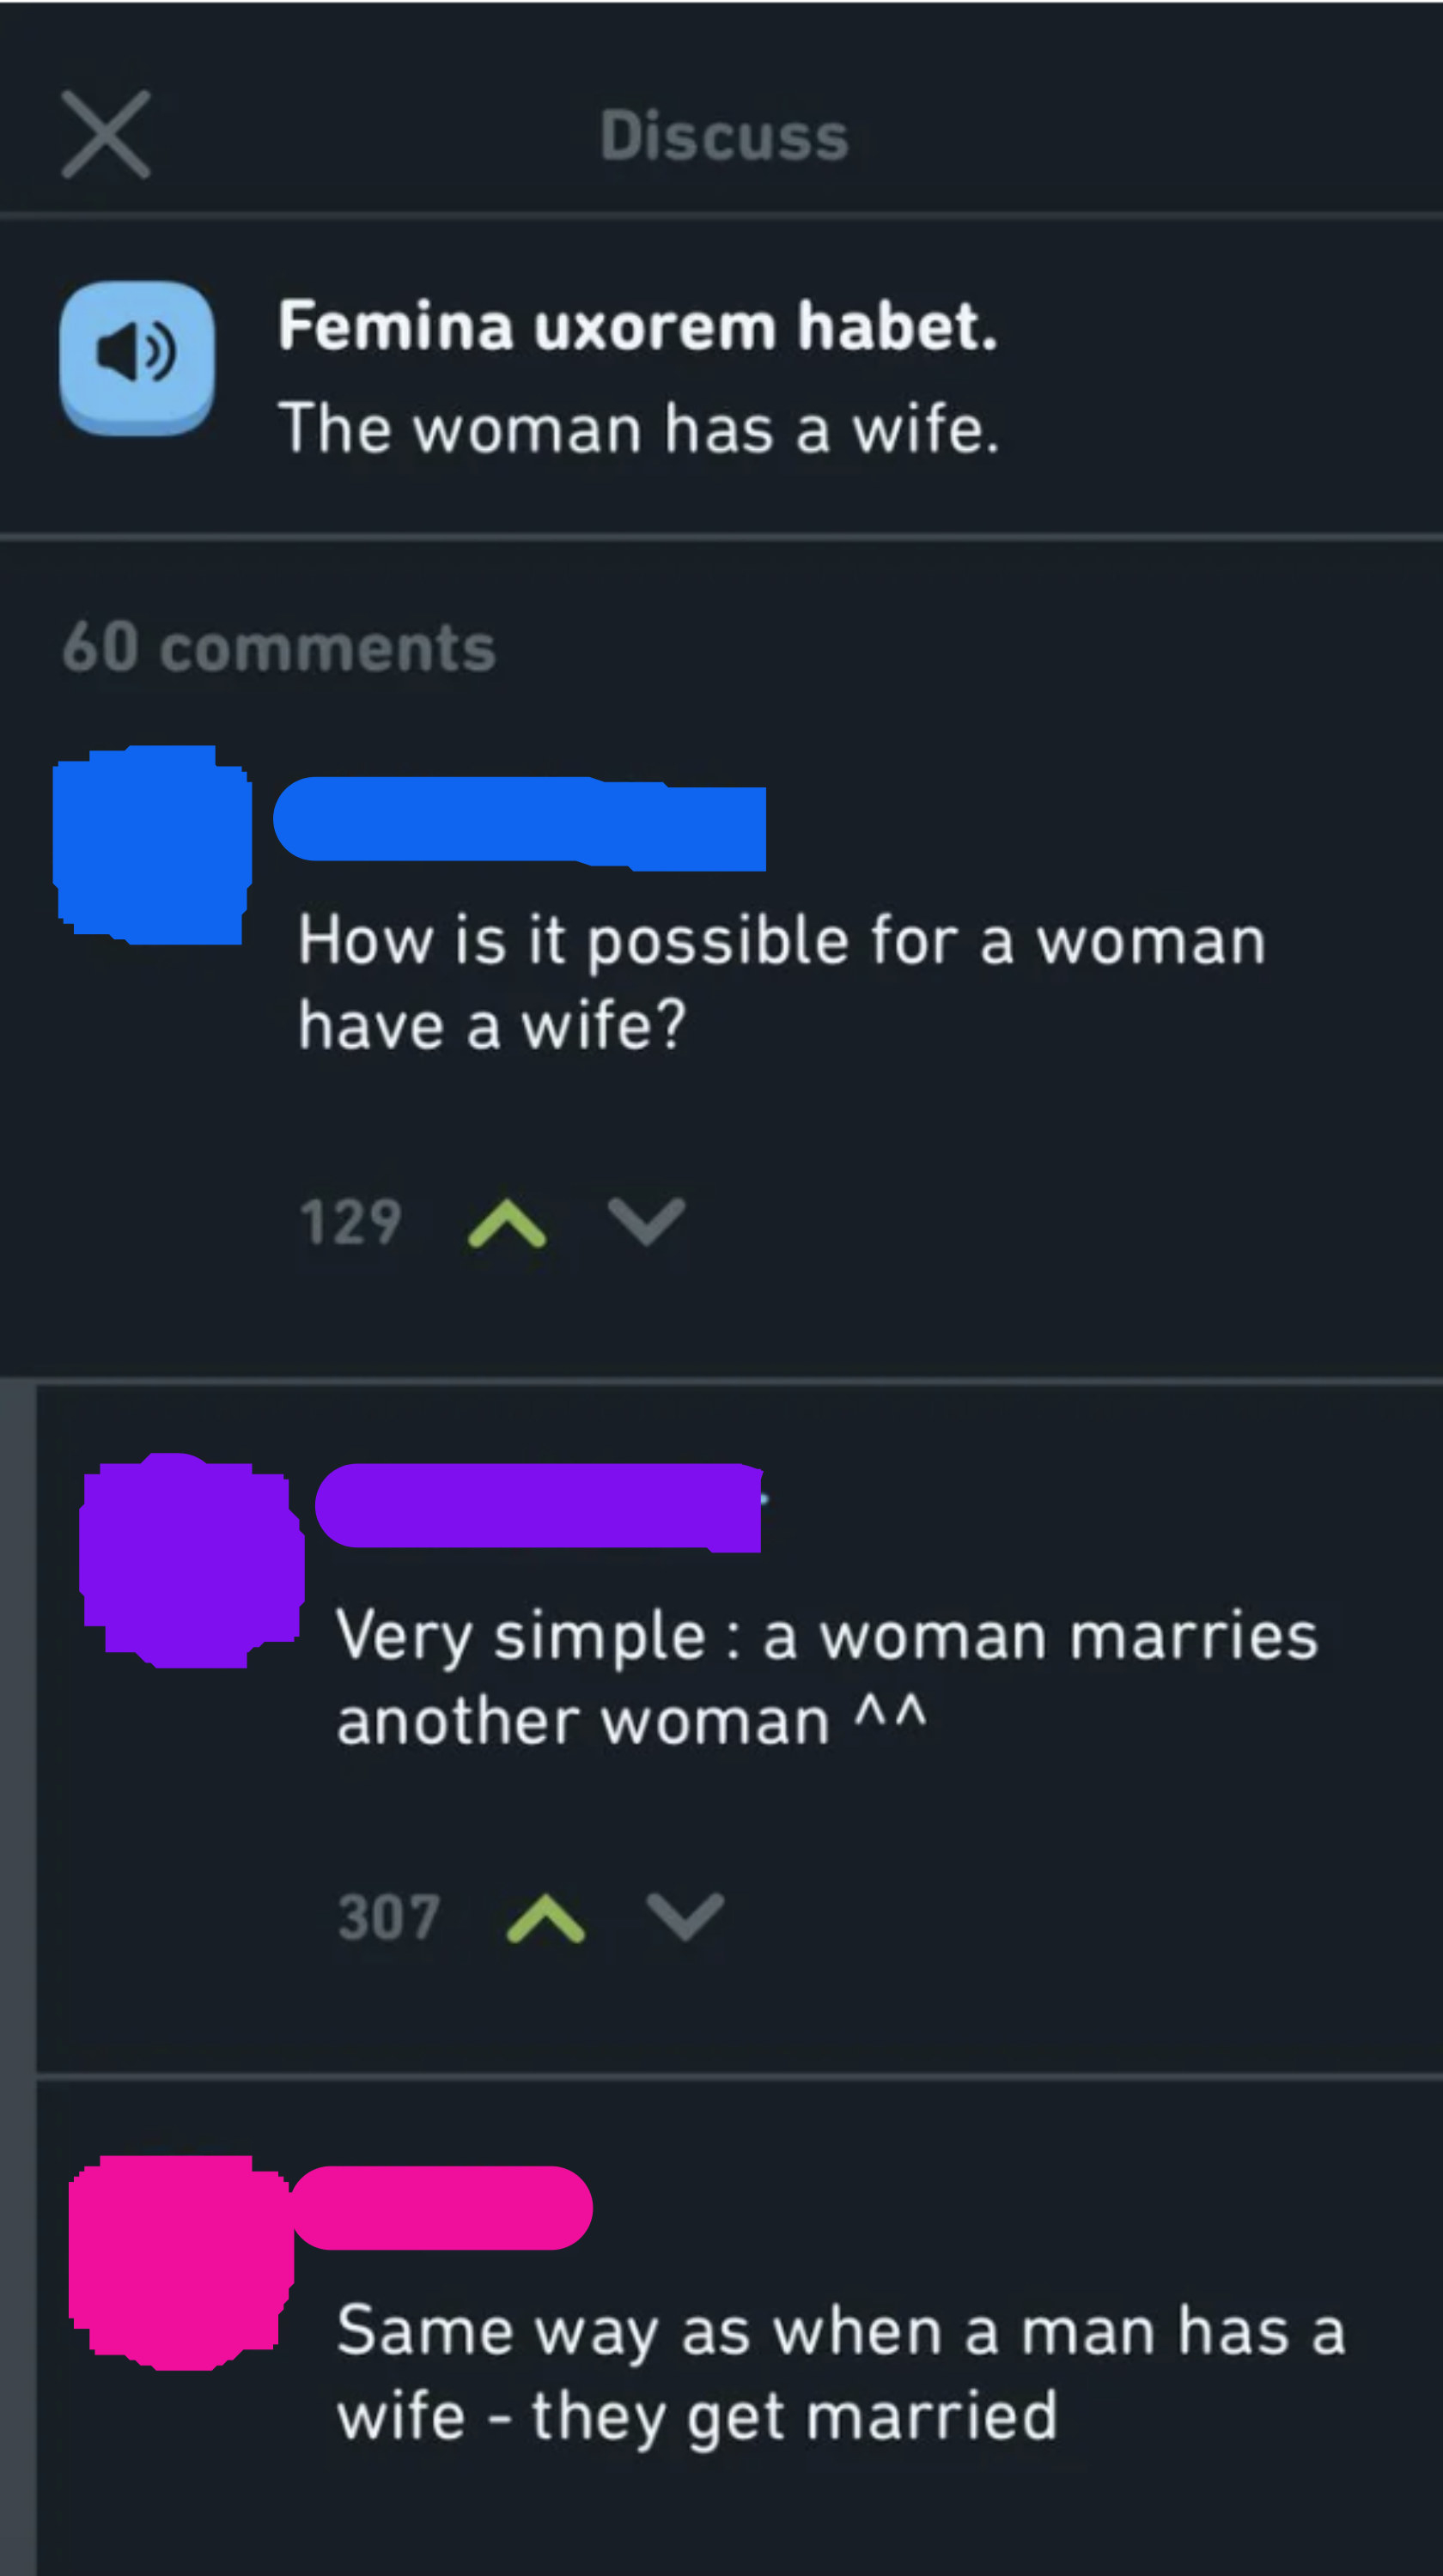 duolingo chat where a person is asking duolingo how a woman can have a wife and duolingo responds the same way a man can have a wife, a woman can marry and have a wife